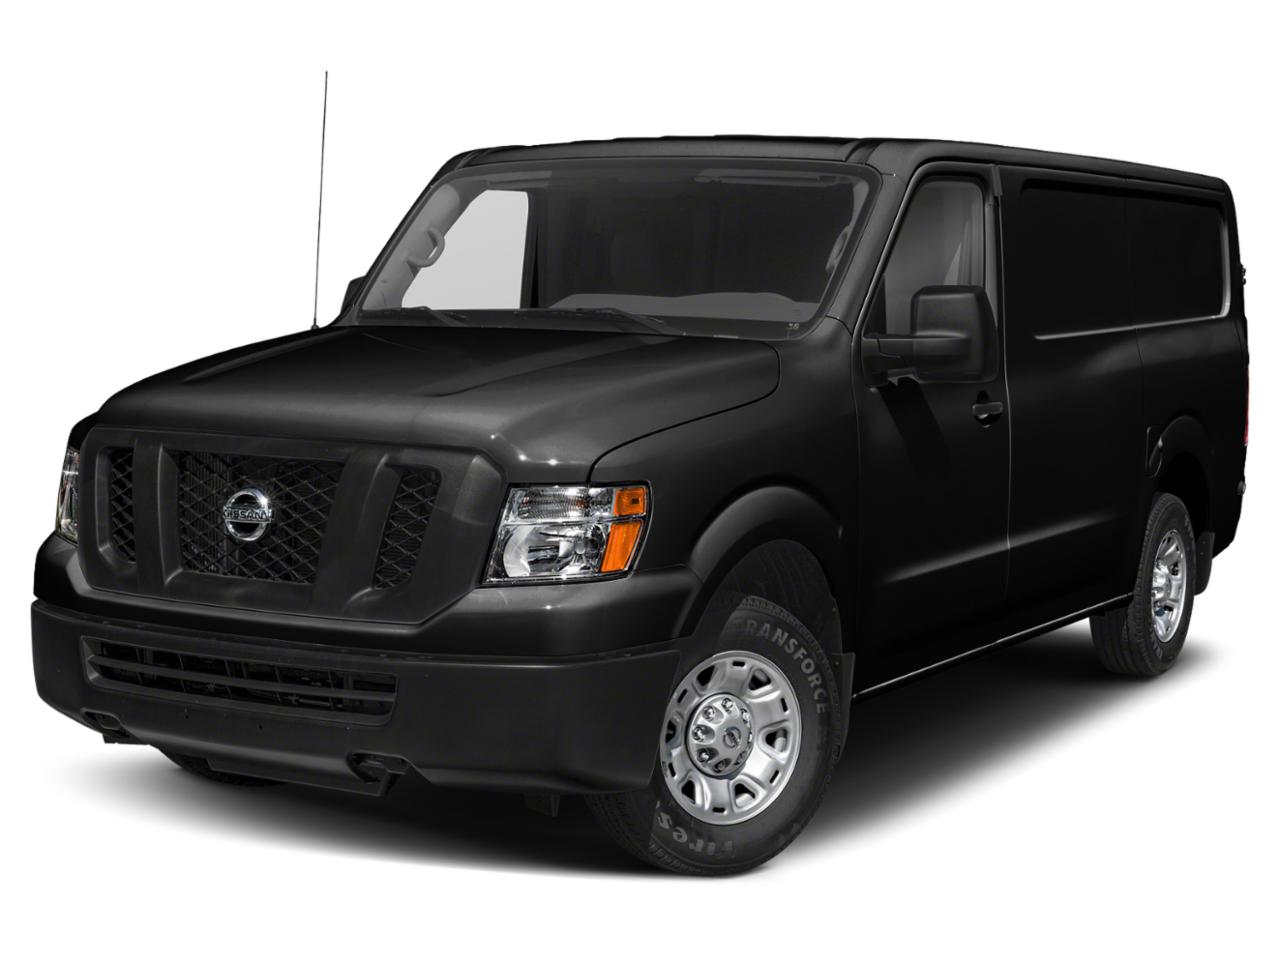 2021 Nissan NV Cargo lease $1109 Mo $0 Down Leases Available